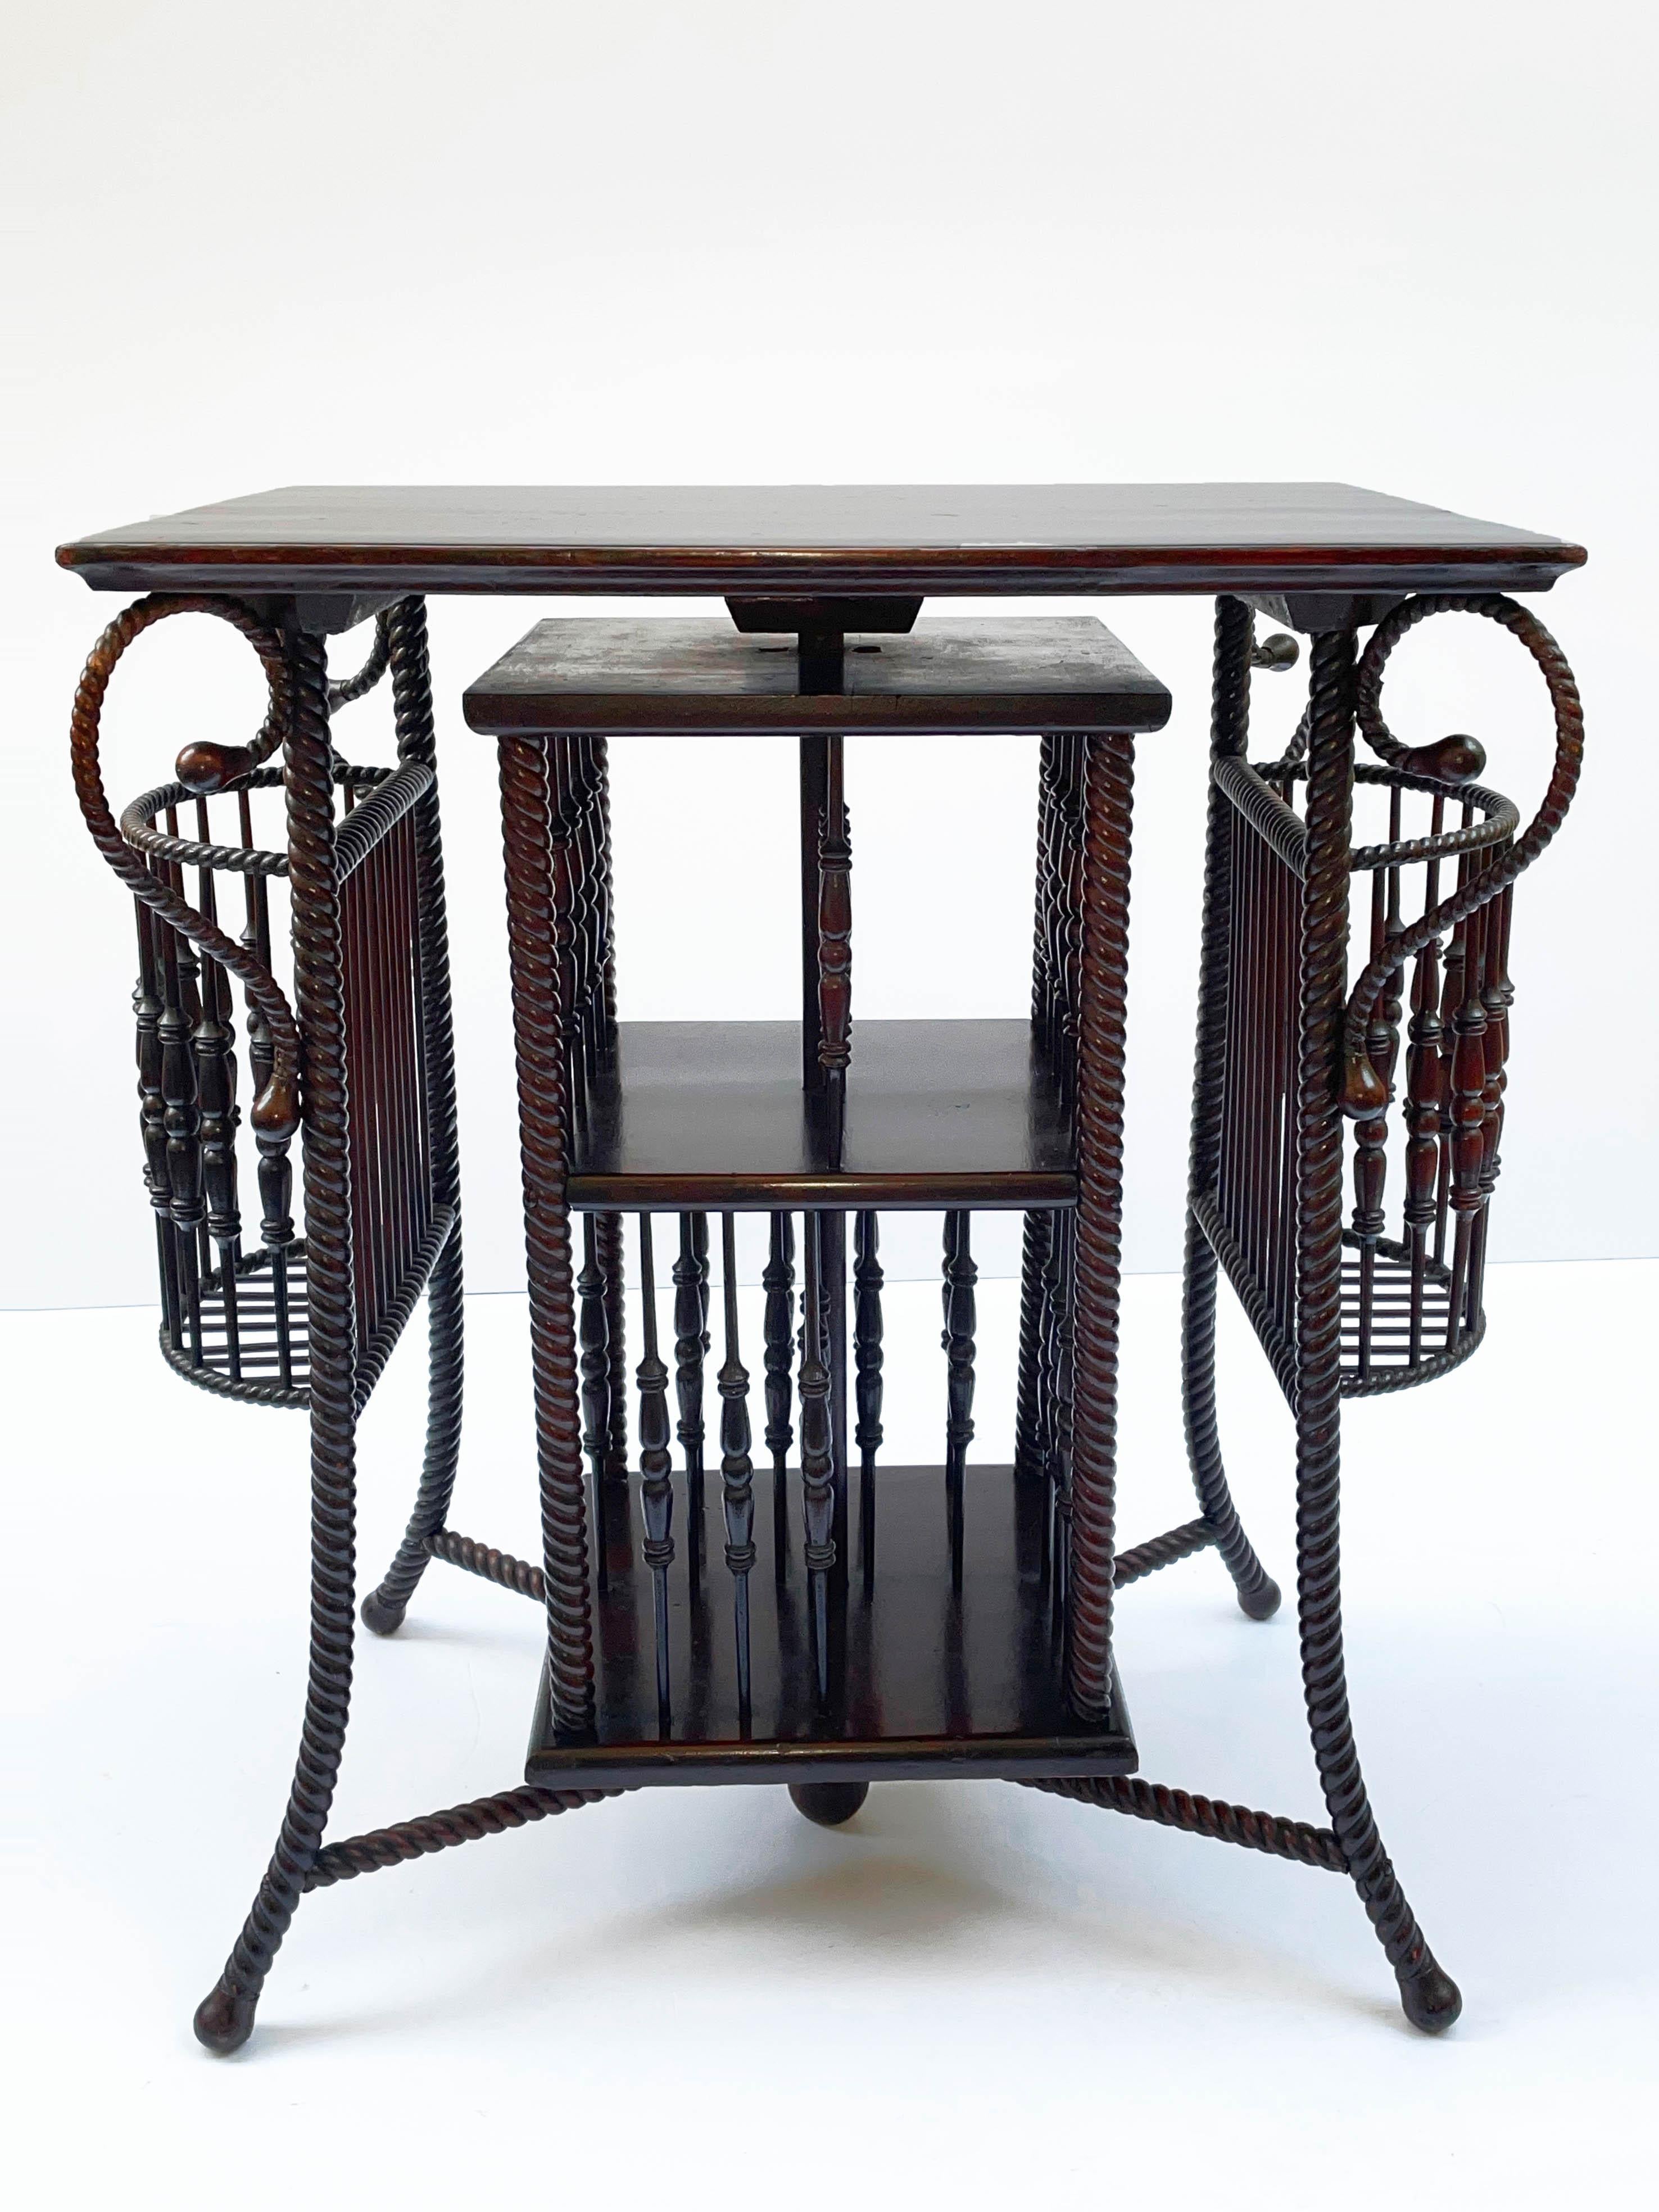 Rare and solid ancient revolving bookcase with precious twisted wood artisanal production. This amazing and unique piece was designed in Austria at the beginning of the 20th century.

This extraordinary piece is fantastic because of the artisanal